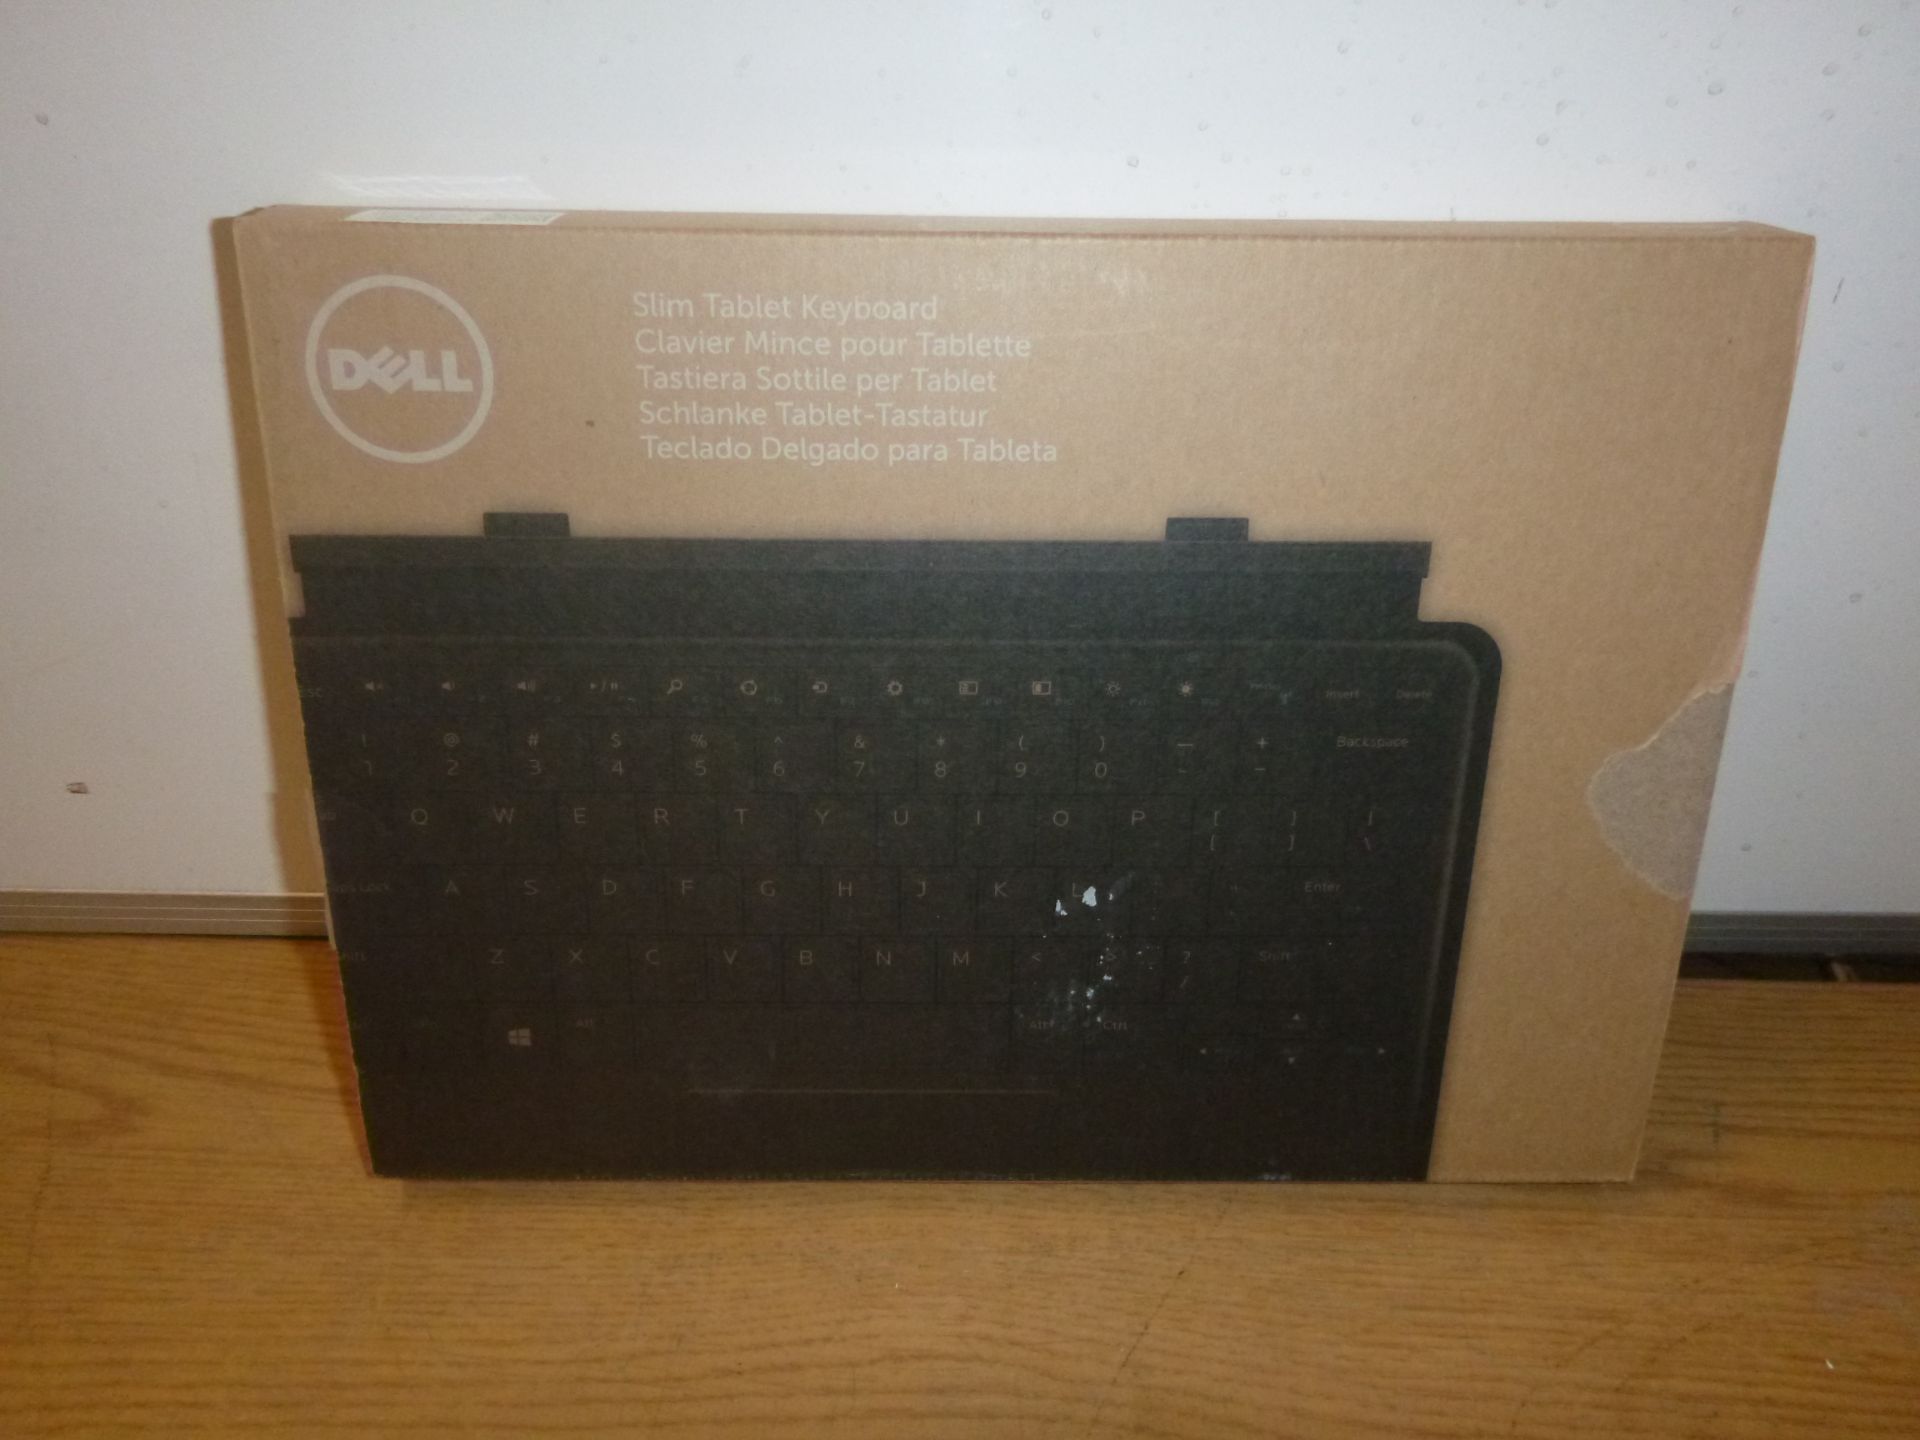 DELL SLIM TABLET KEYBOARD FOR DELL VENUE 11 PRO 5130/7130/7139 TABLET. BOXED - Image 2 of 2